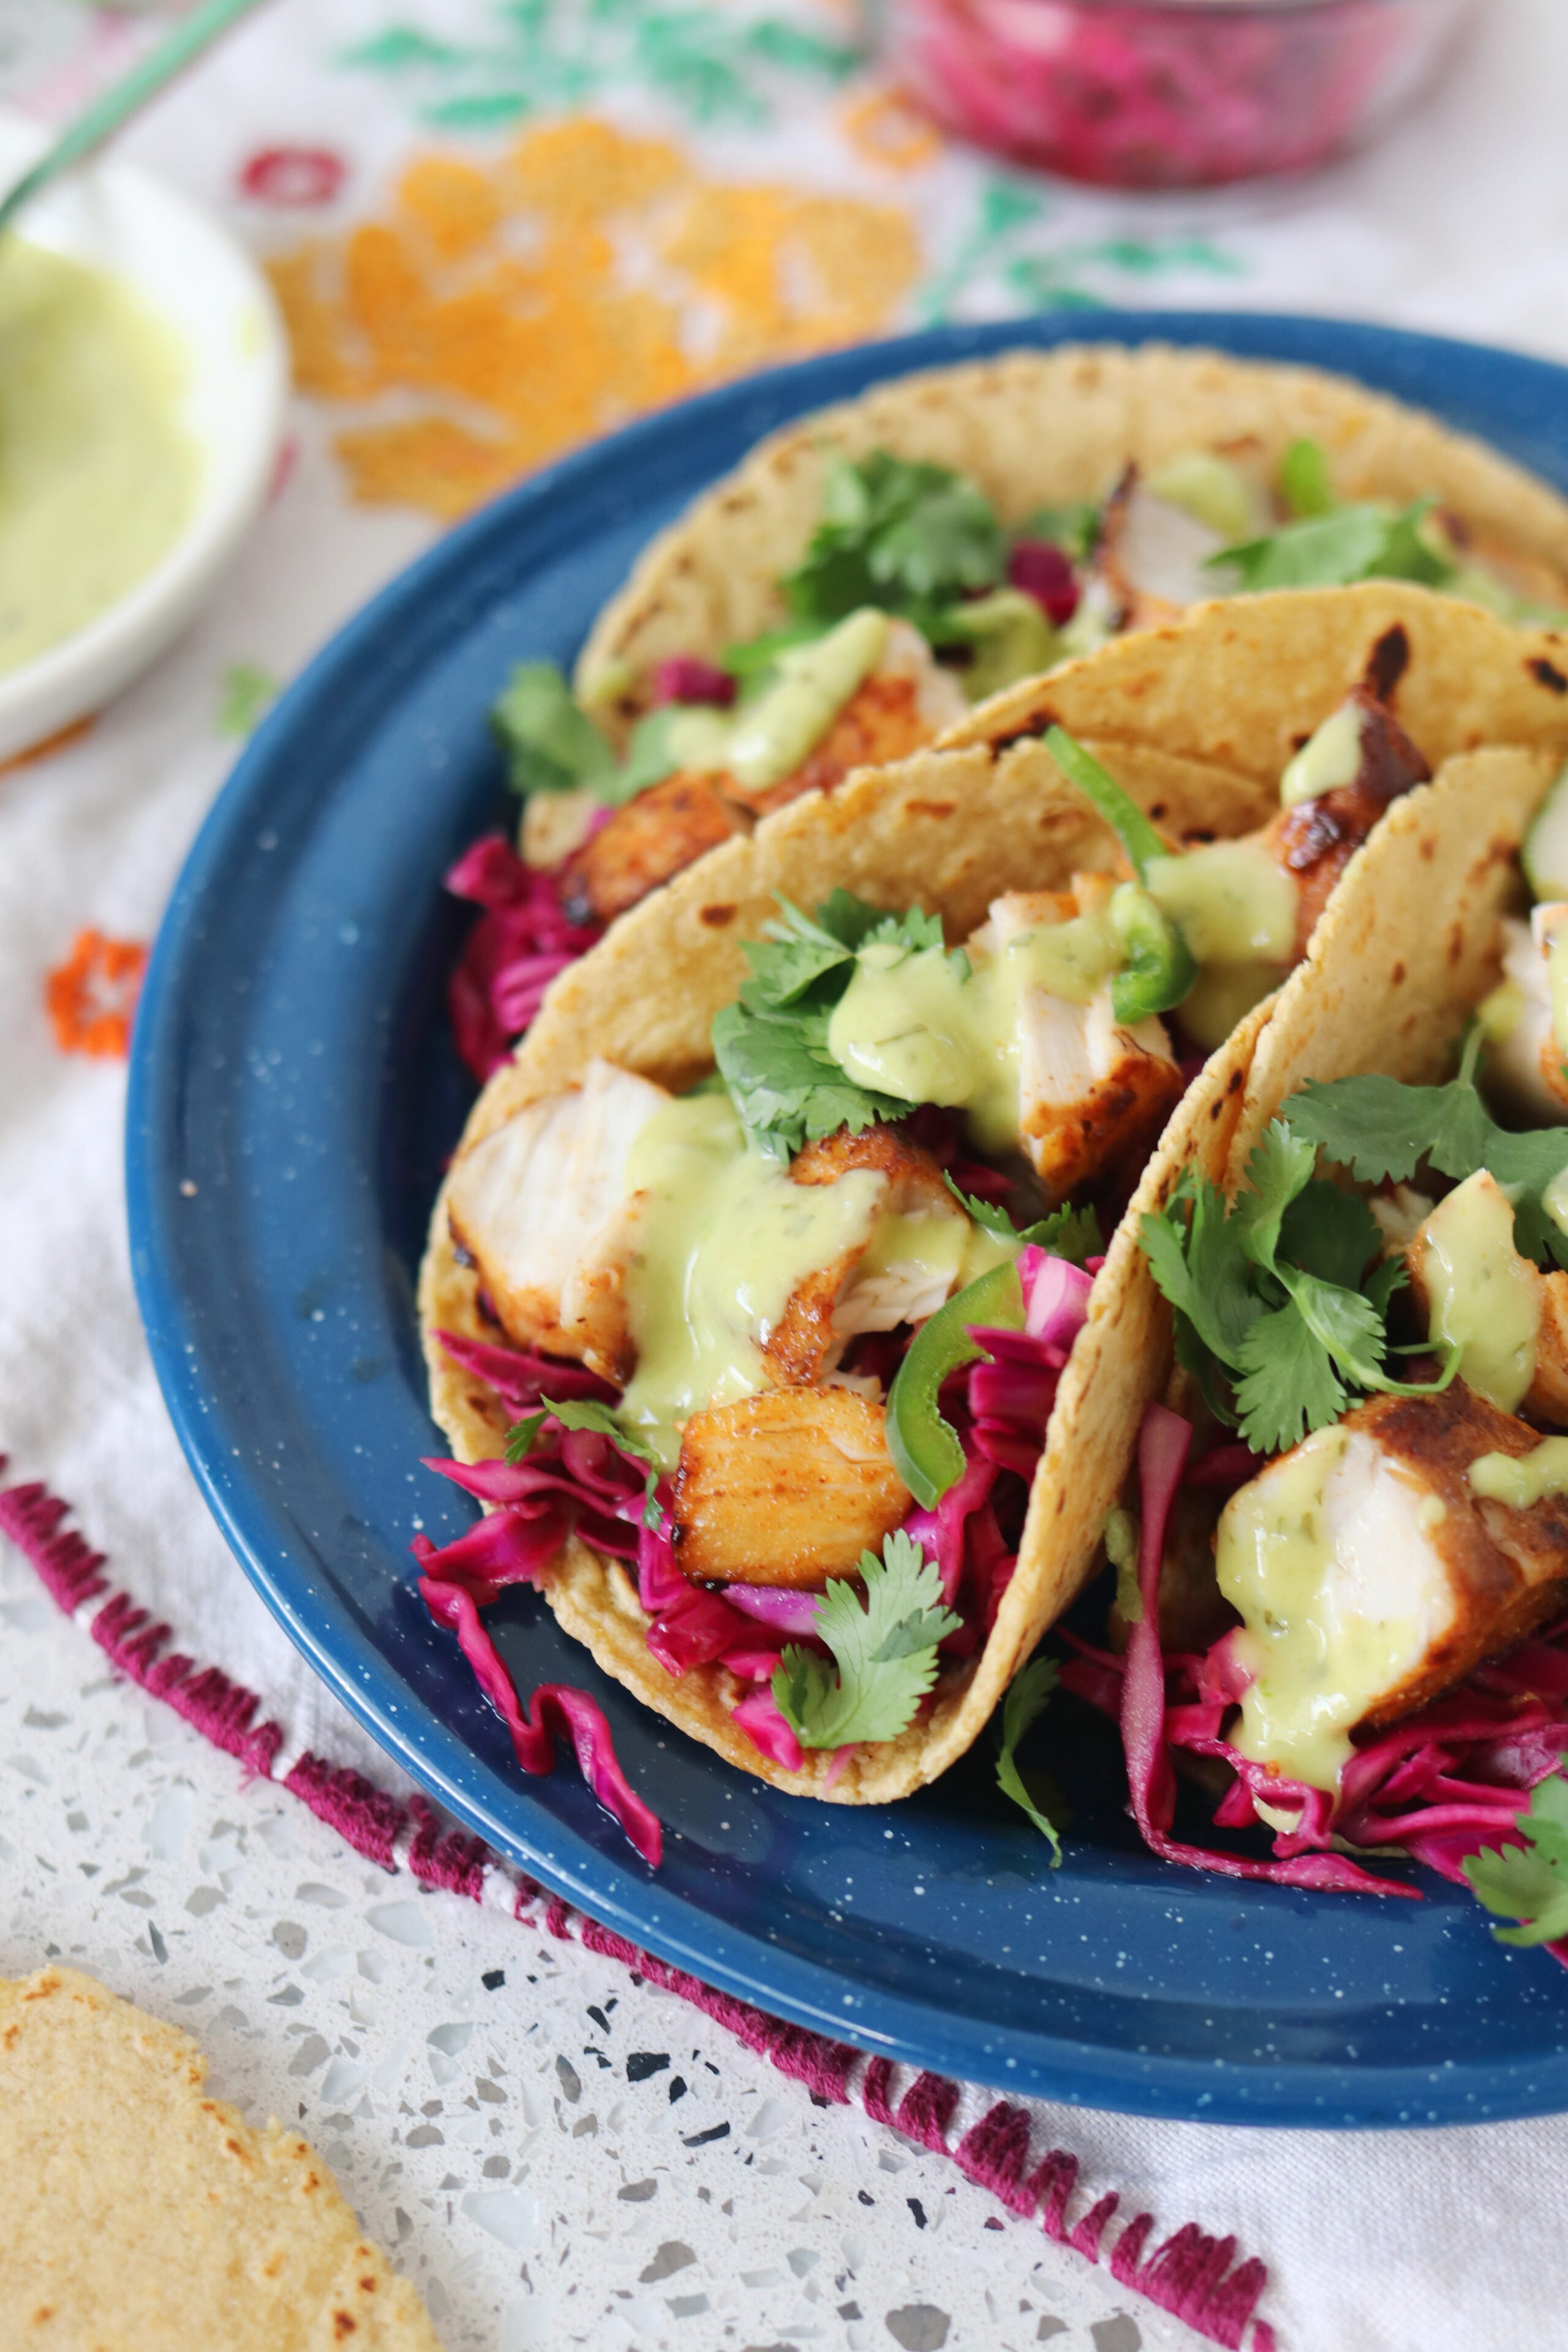 Coconut Tequila Fish Tacos